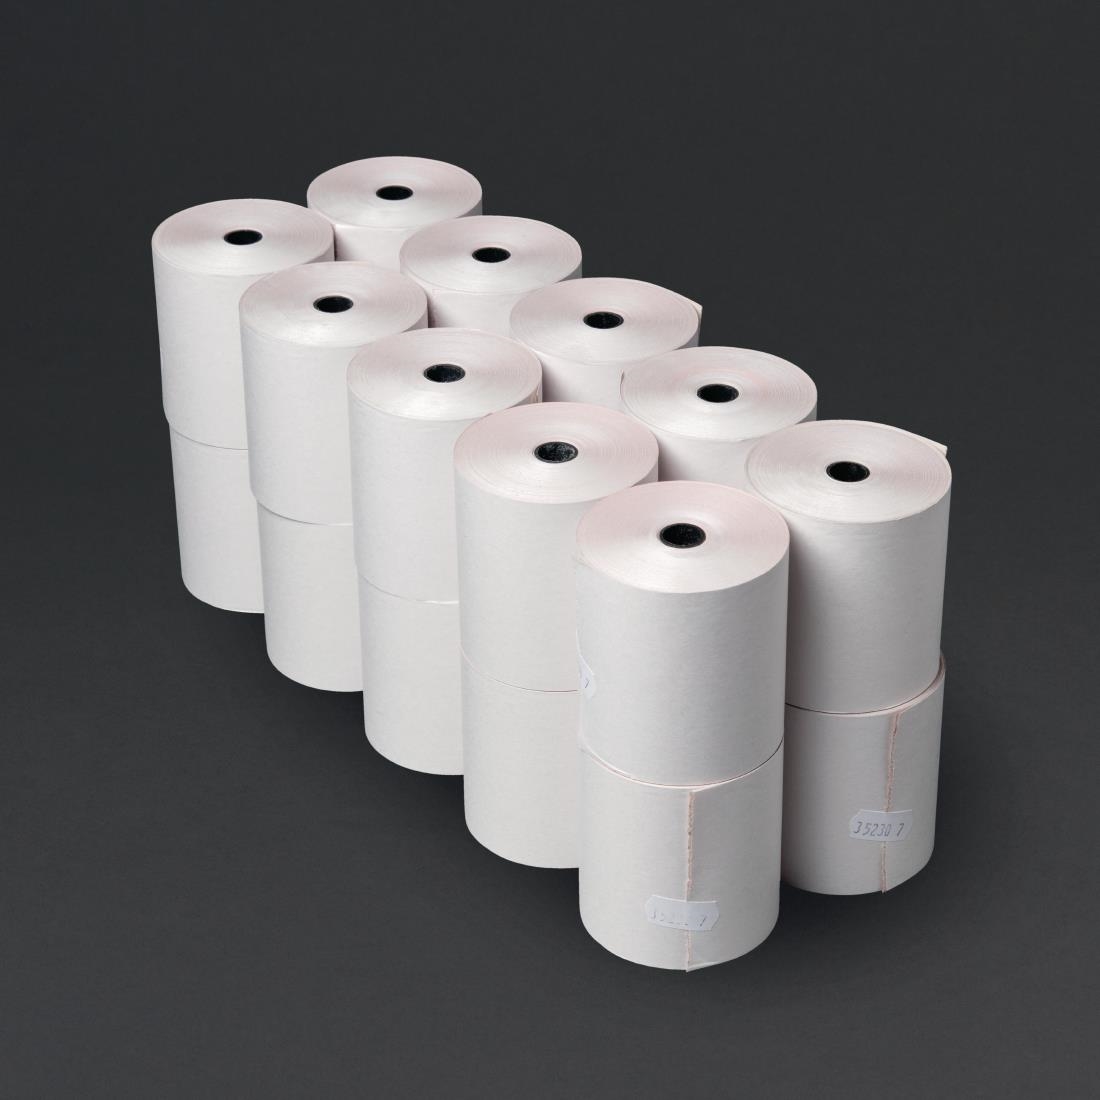 Fiesta Non-Thermal 3ply Till Roll 75 x 70mm (Pack of 20)